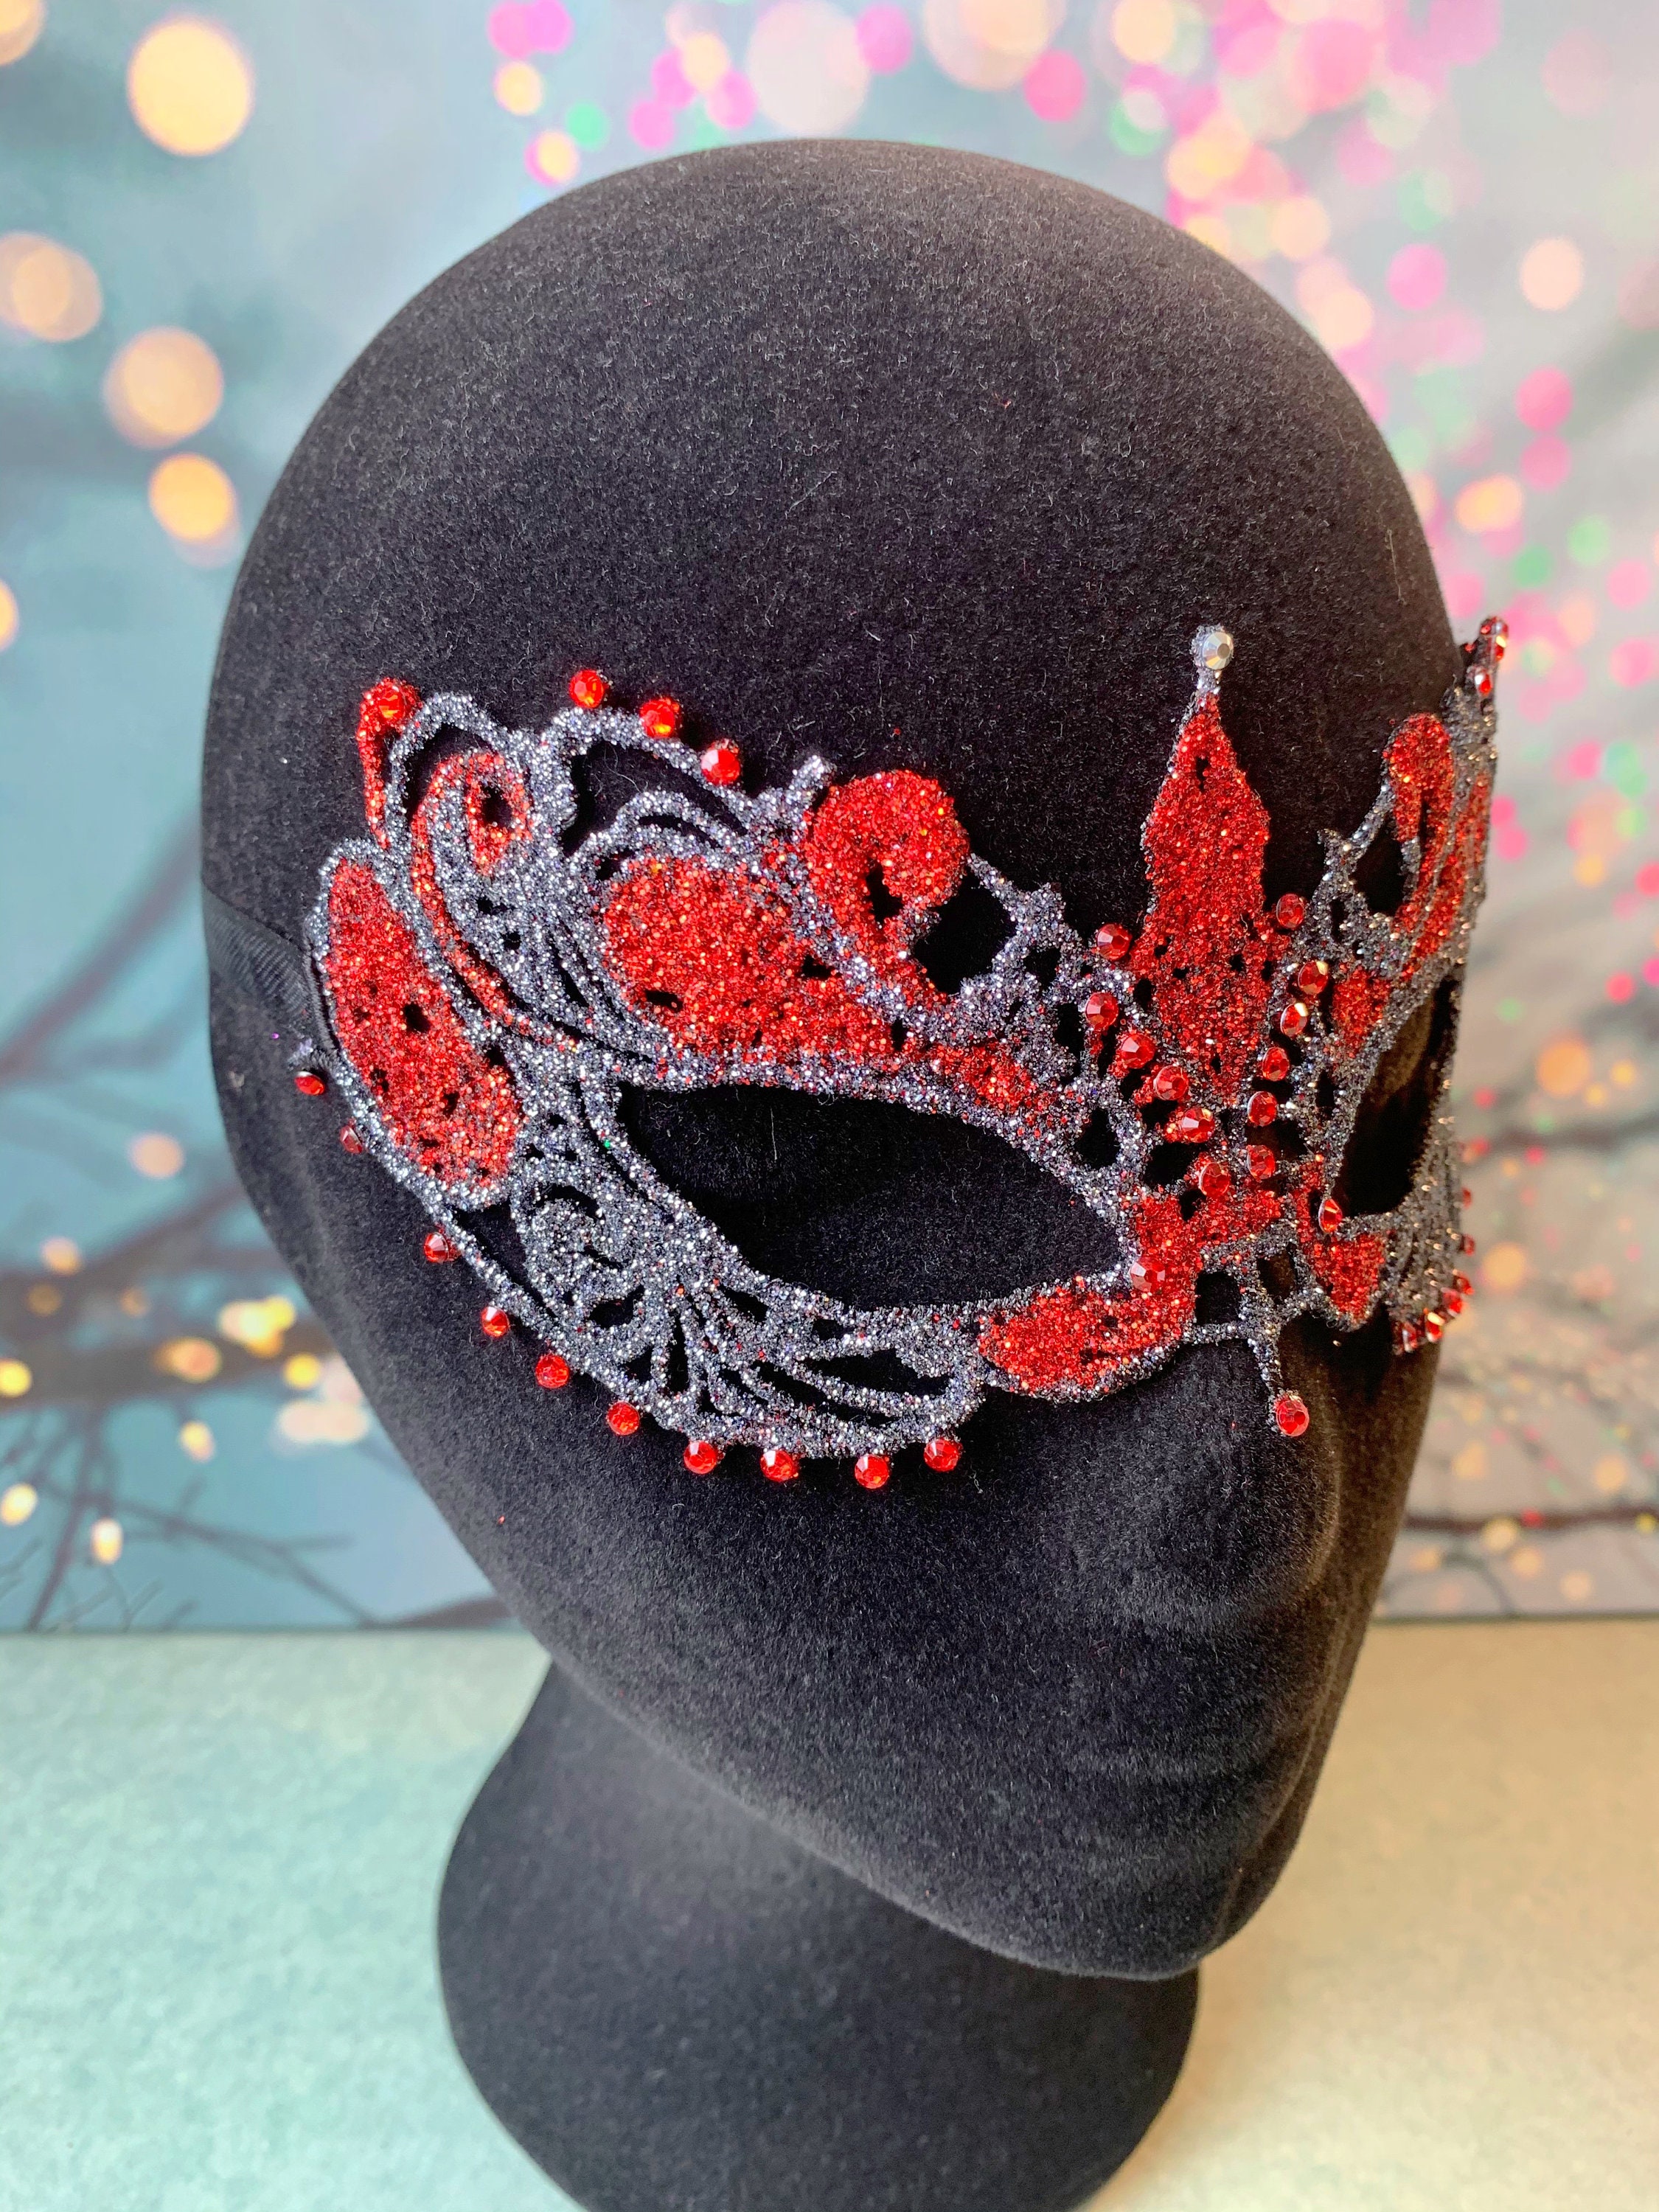 Black Red Fancy Full Cut Out Masquerade Mask 